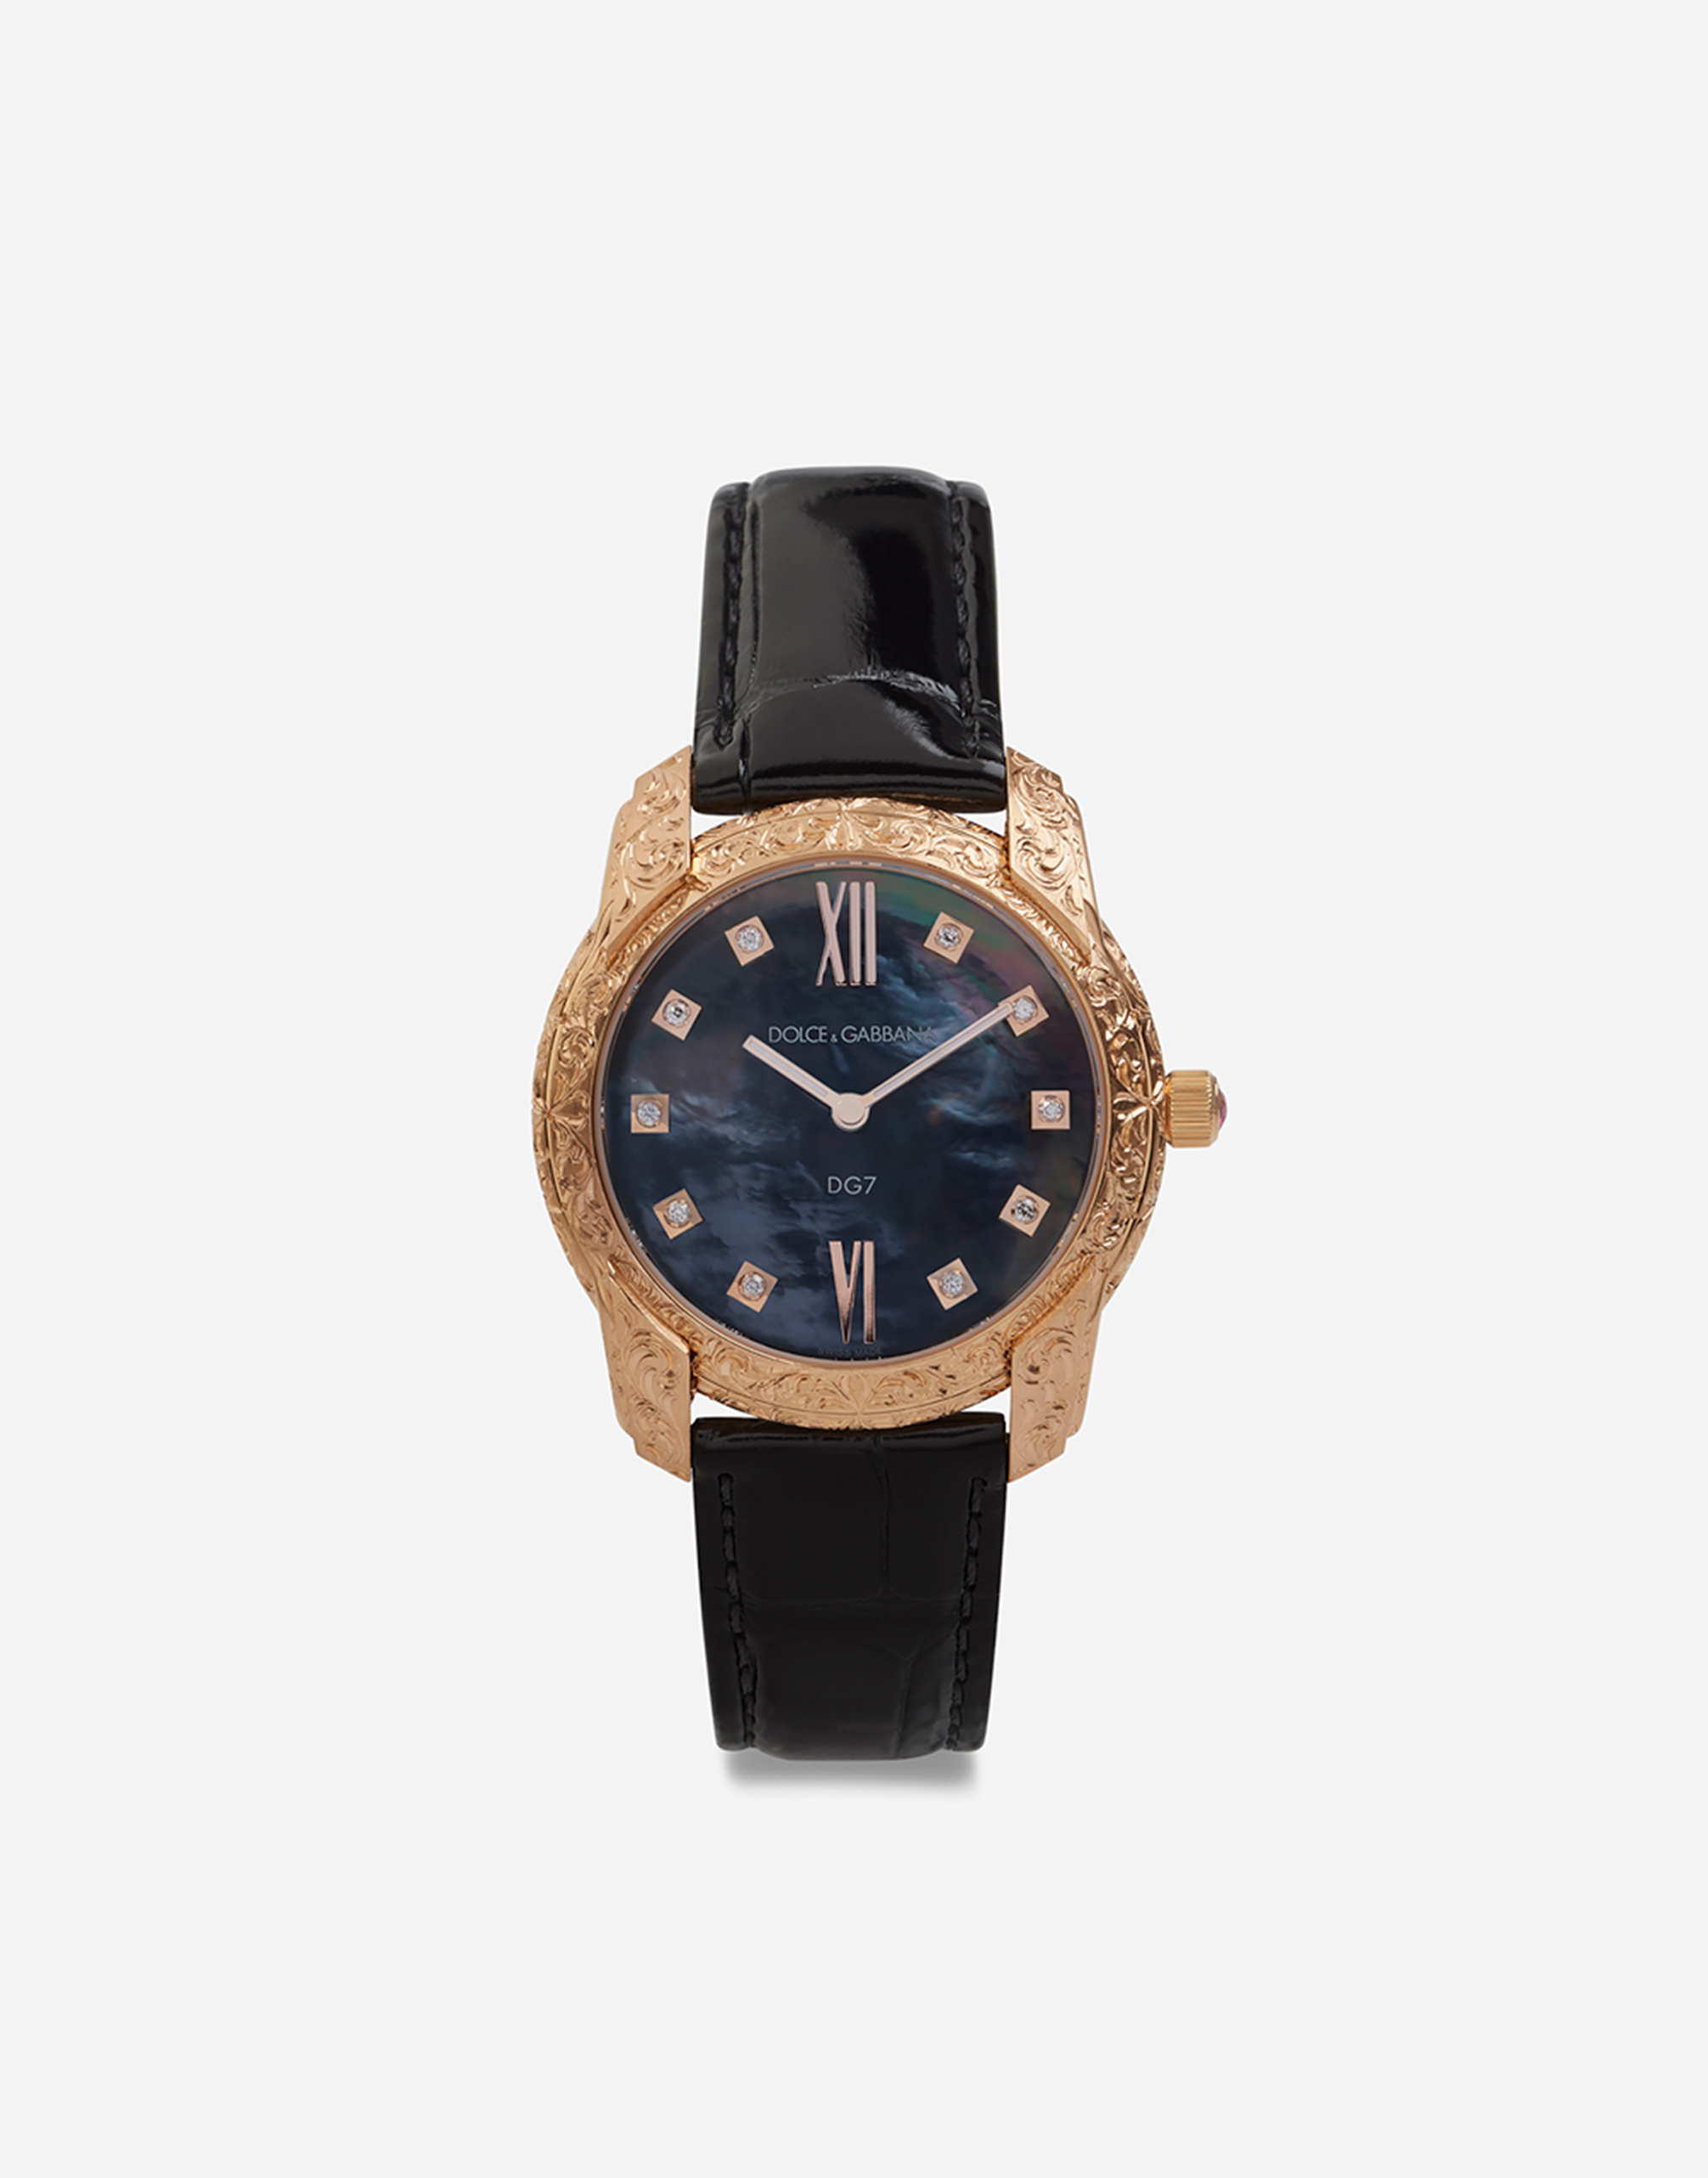 Dolce & Gabbana Dg7 Gattopardo Watch In Red Gold With Black Mother Of Pearl And Diamonds